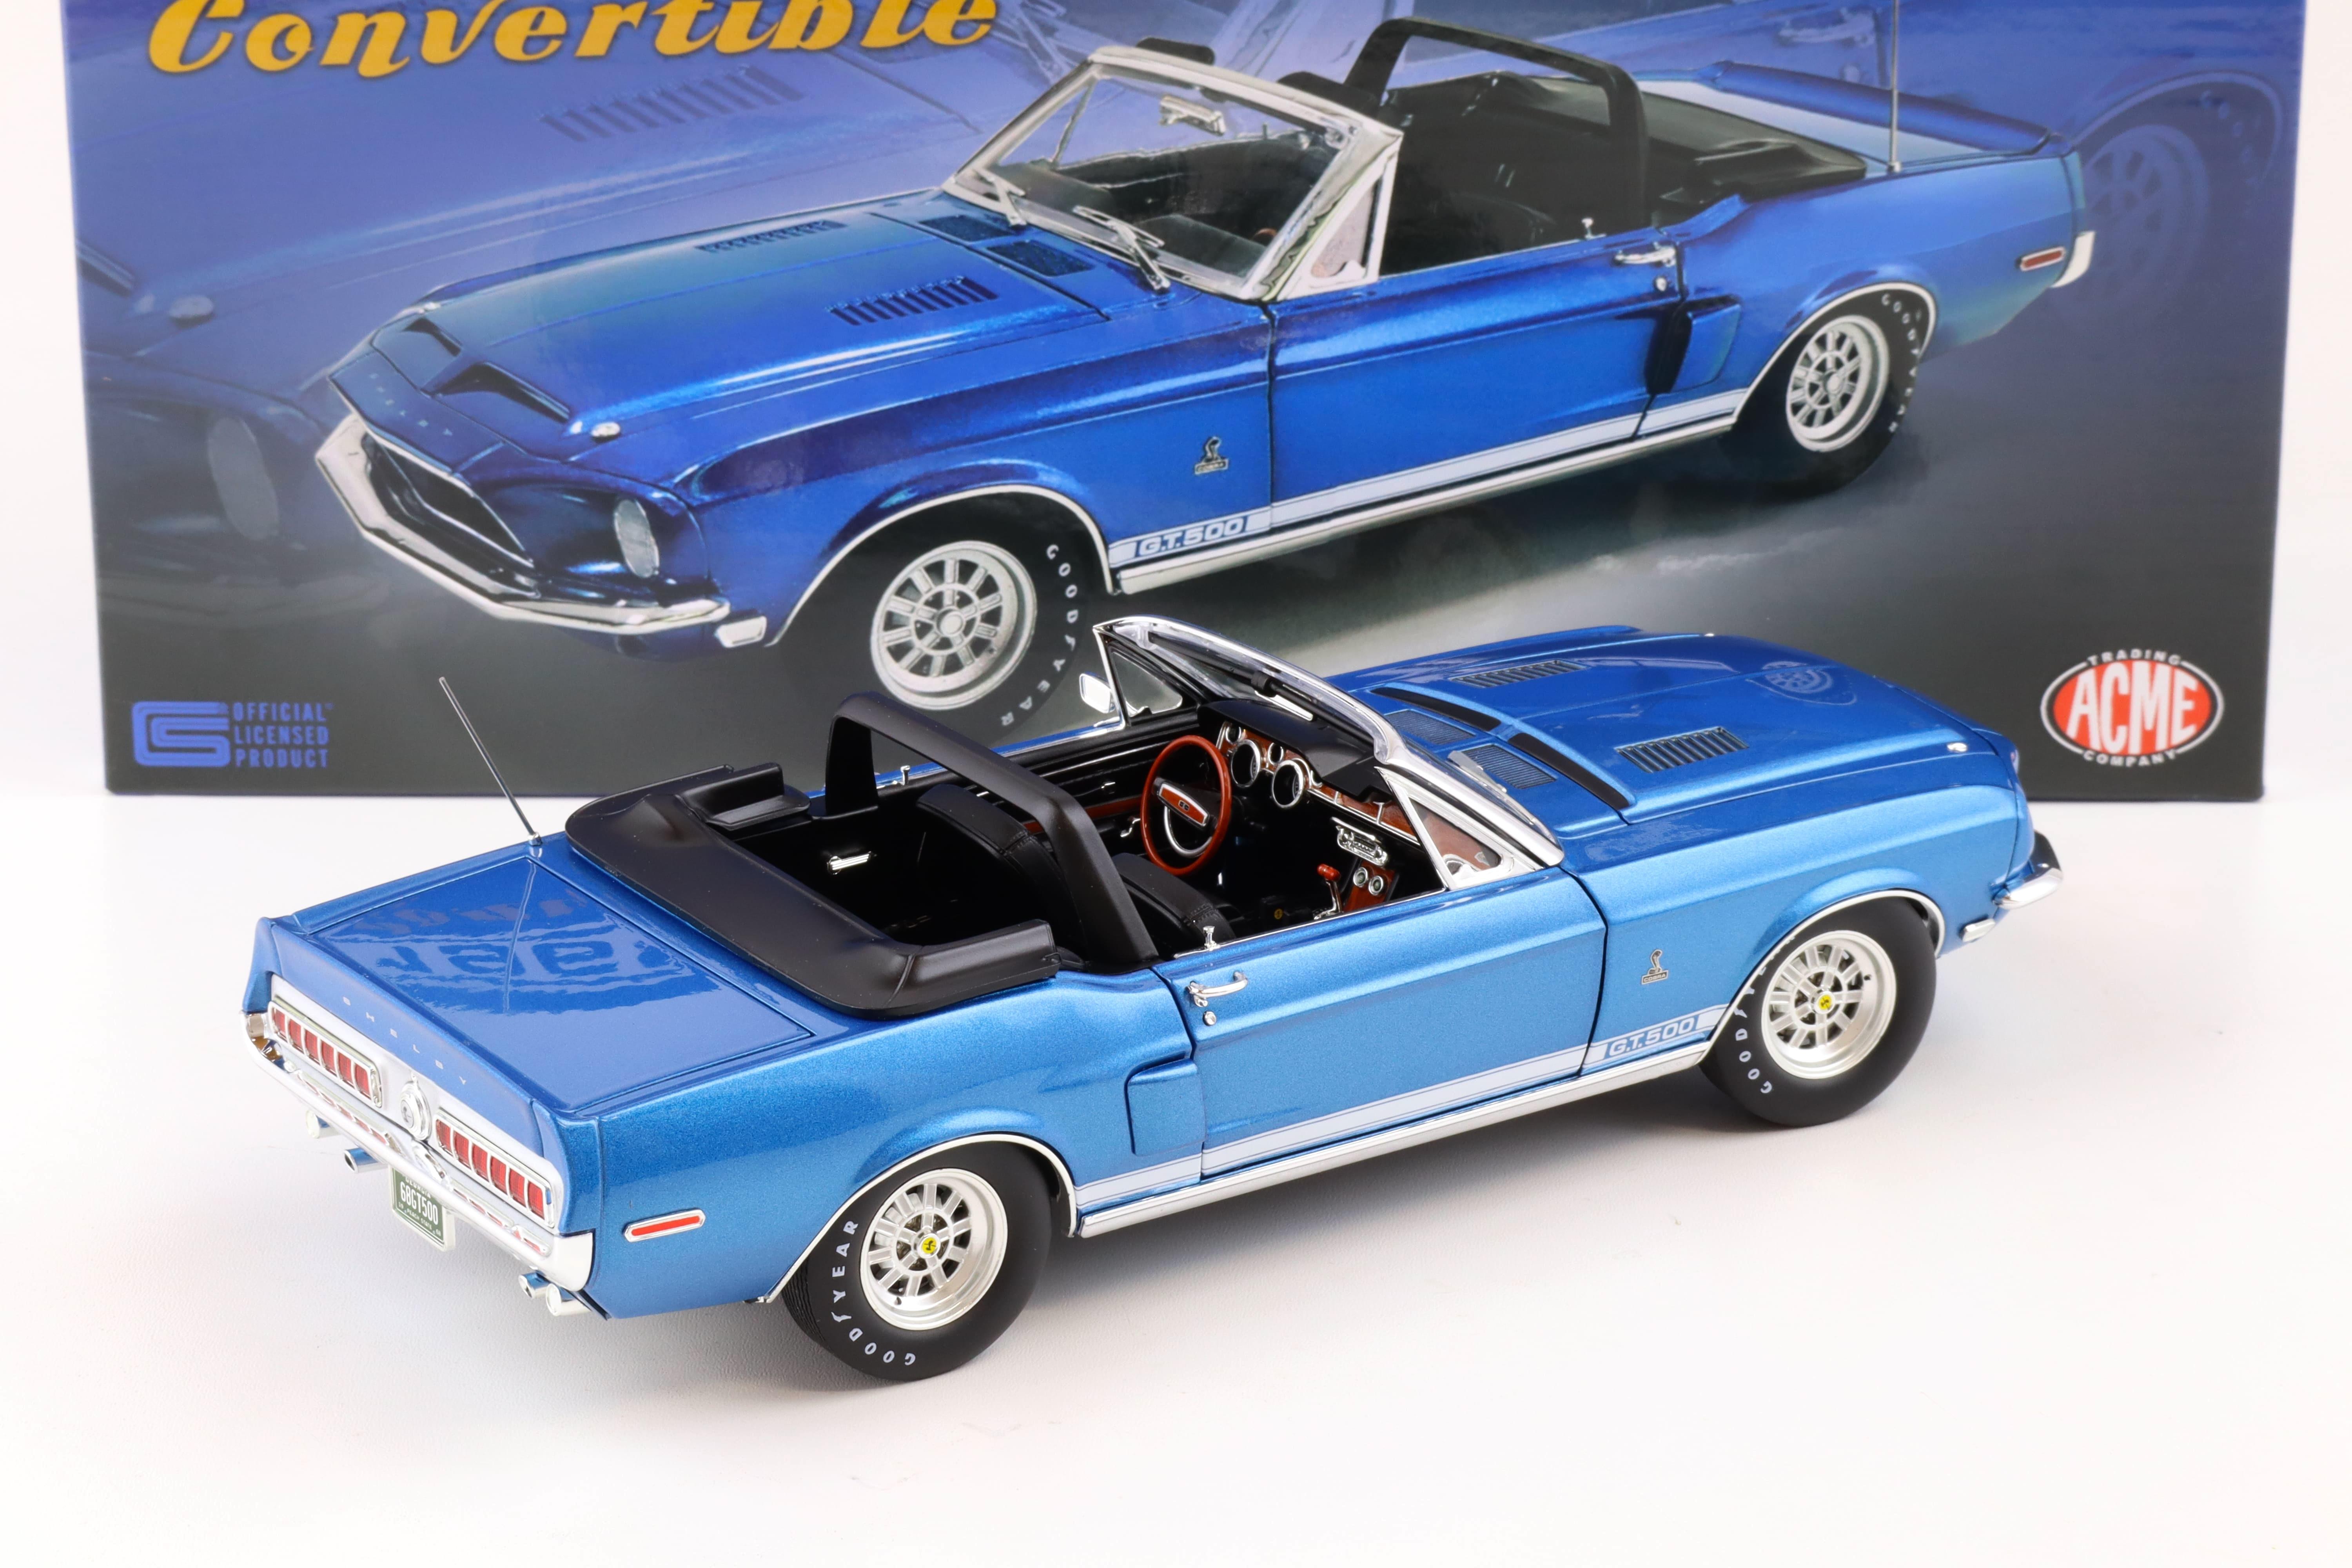 1:18 ACME 1968 Shelby GT500 Convertible blue metallic with white Top